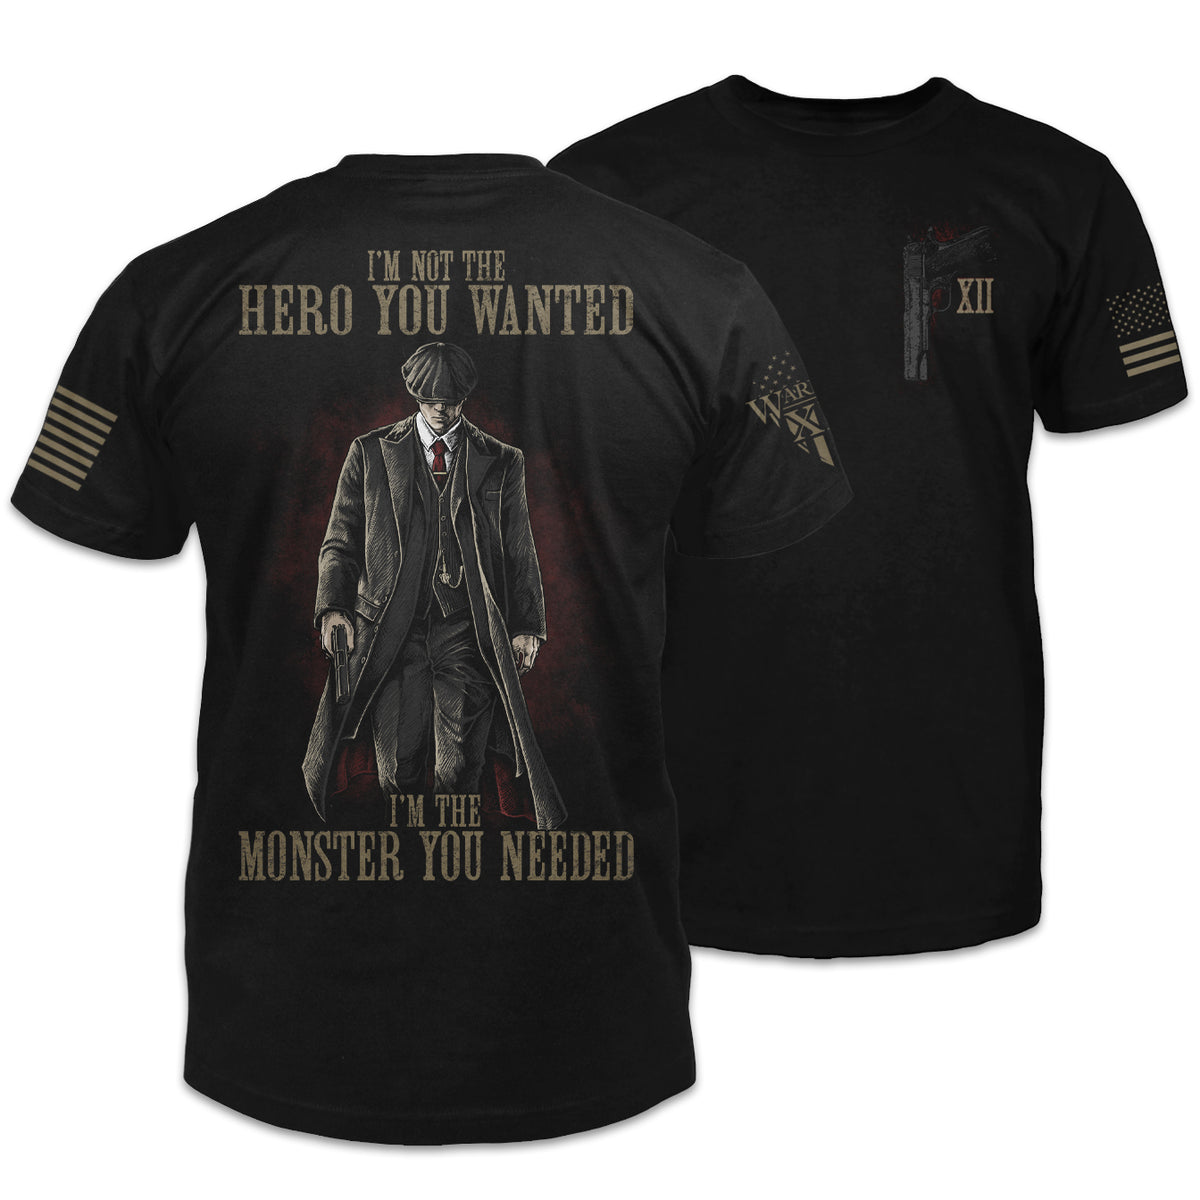 Front & back black t-shirt with the words "I'm not the hero you wanted, I'm the monster you needed" with a Tommy Shelby outline printed on the shirt.